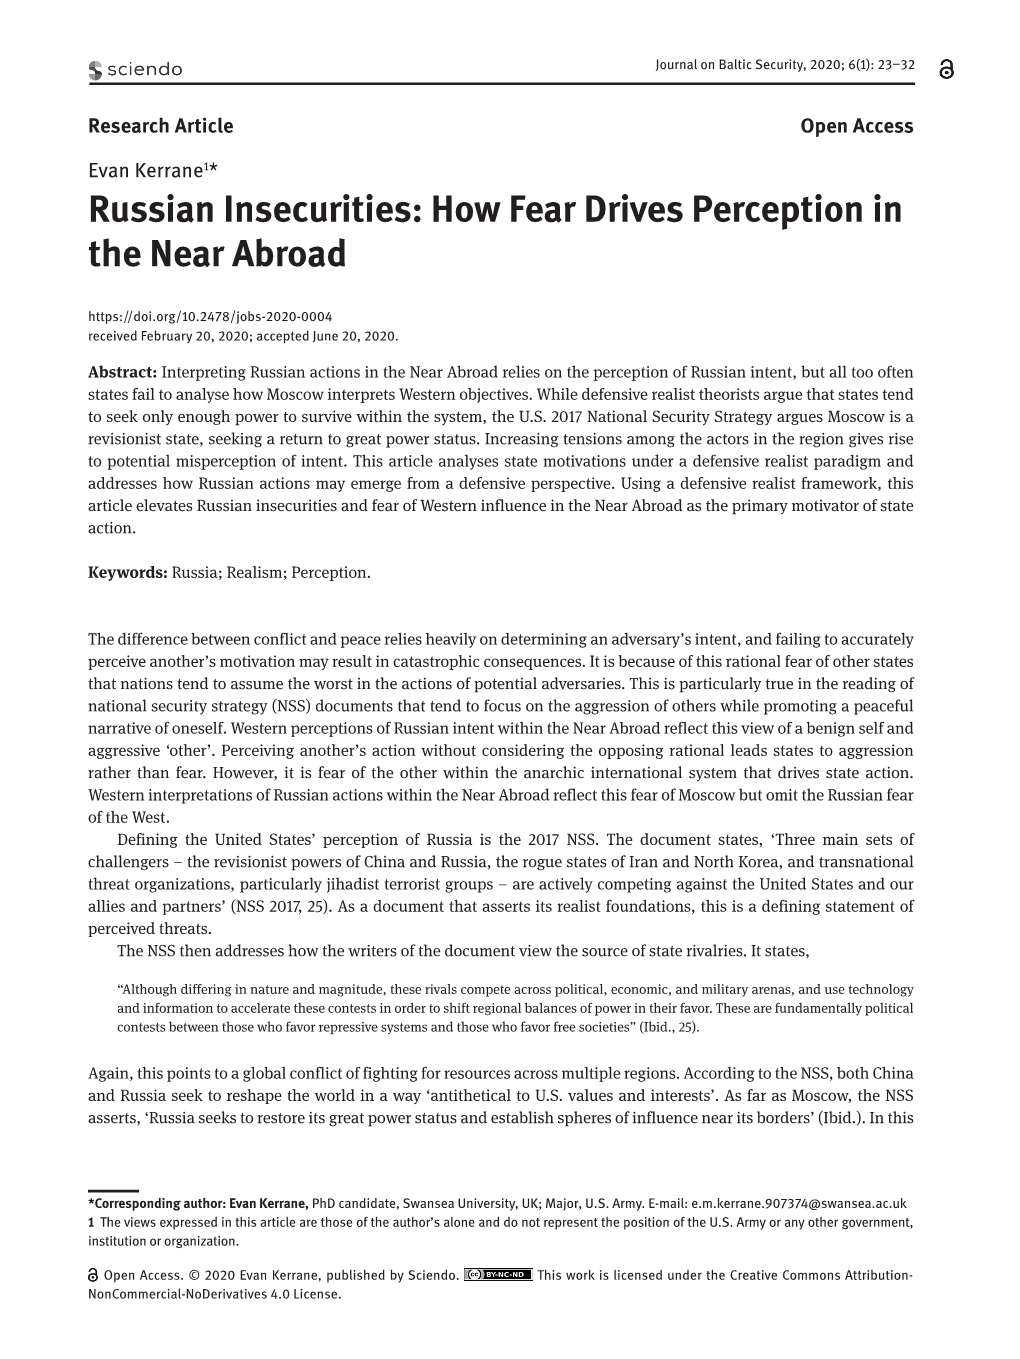 Russian Insecurities: How Fear Drives Perception in the Near Abroad Received February 20, 2020; Accepted June 20, 2020